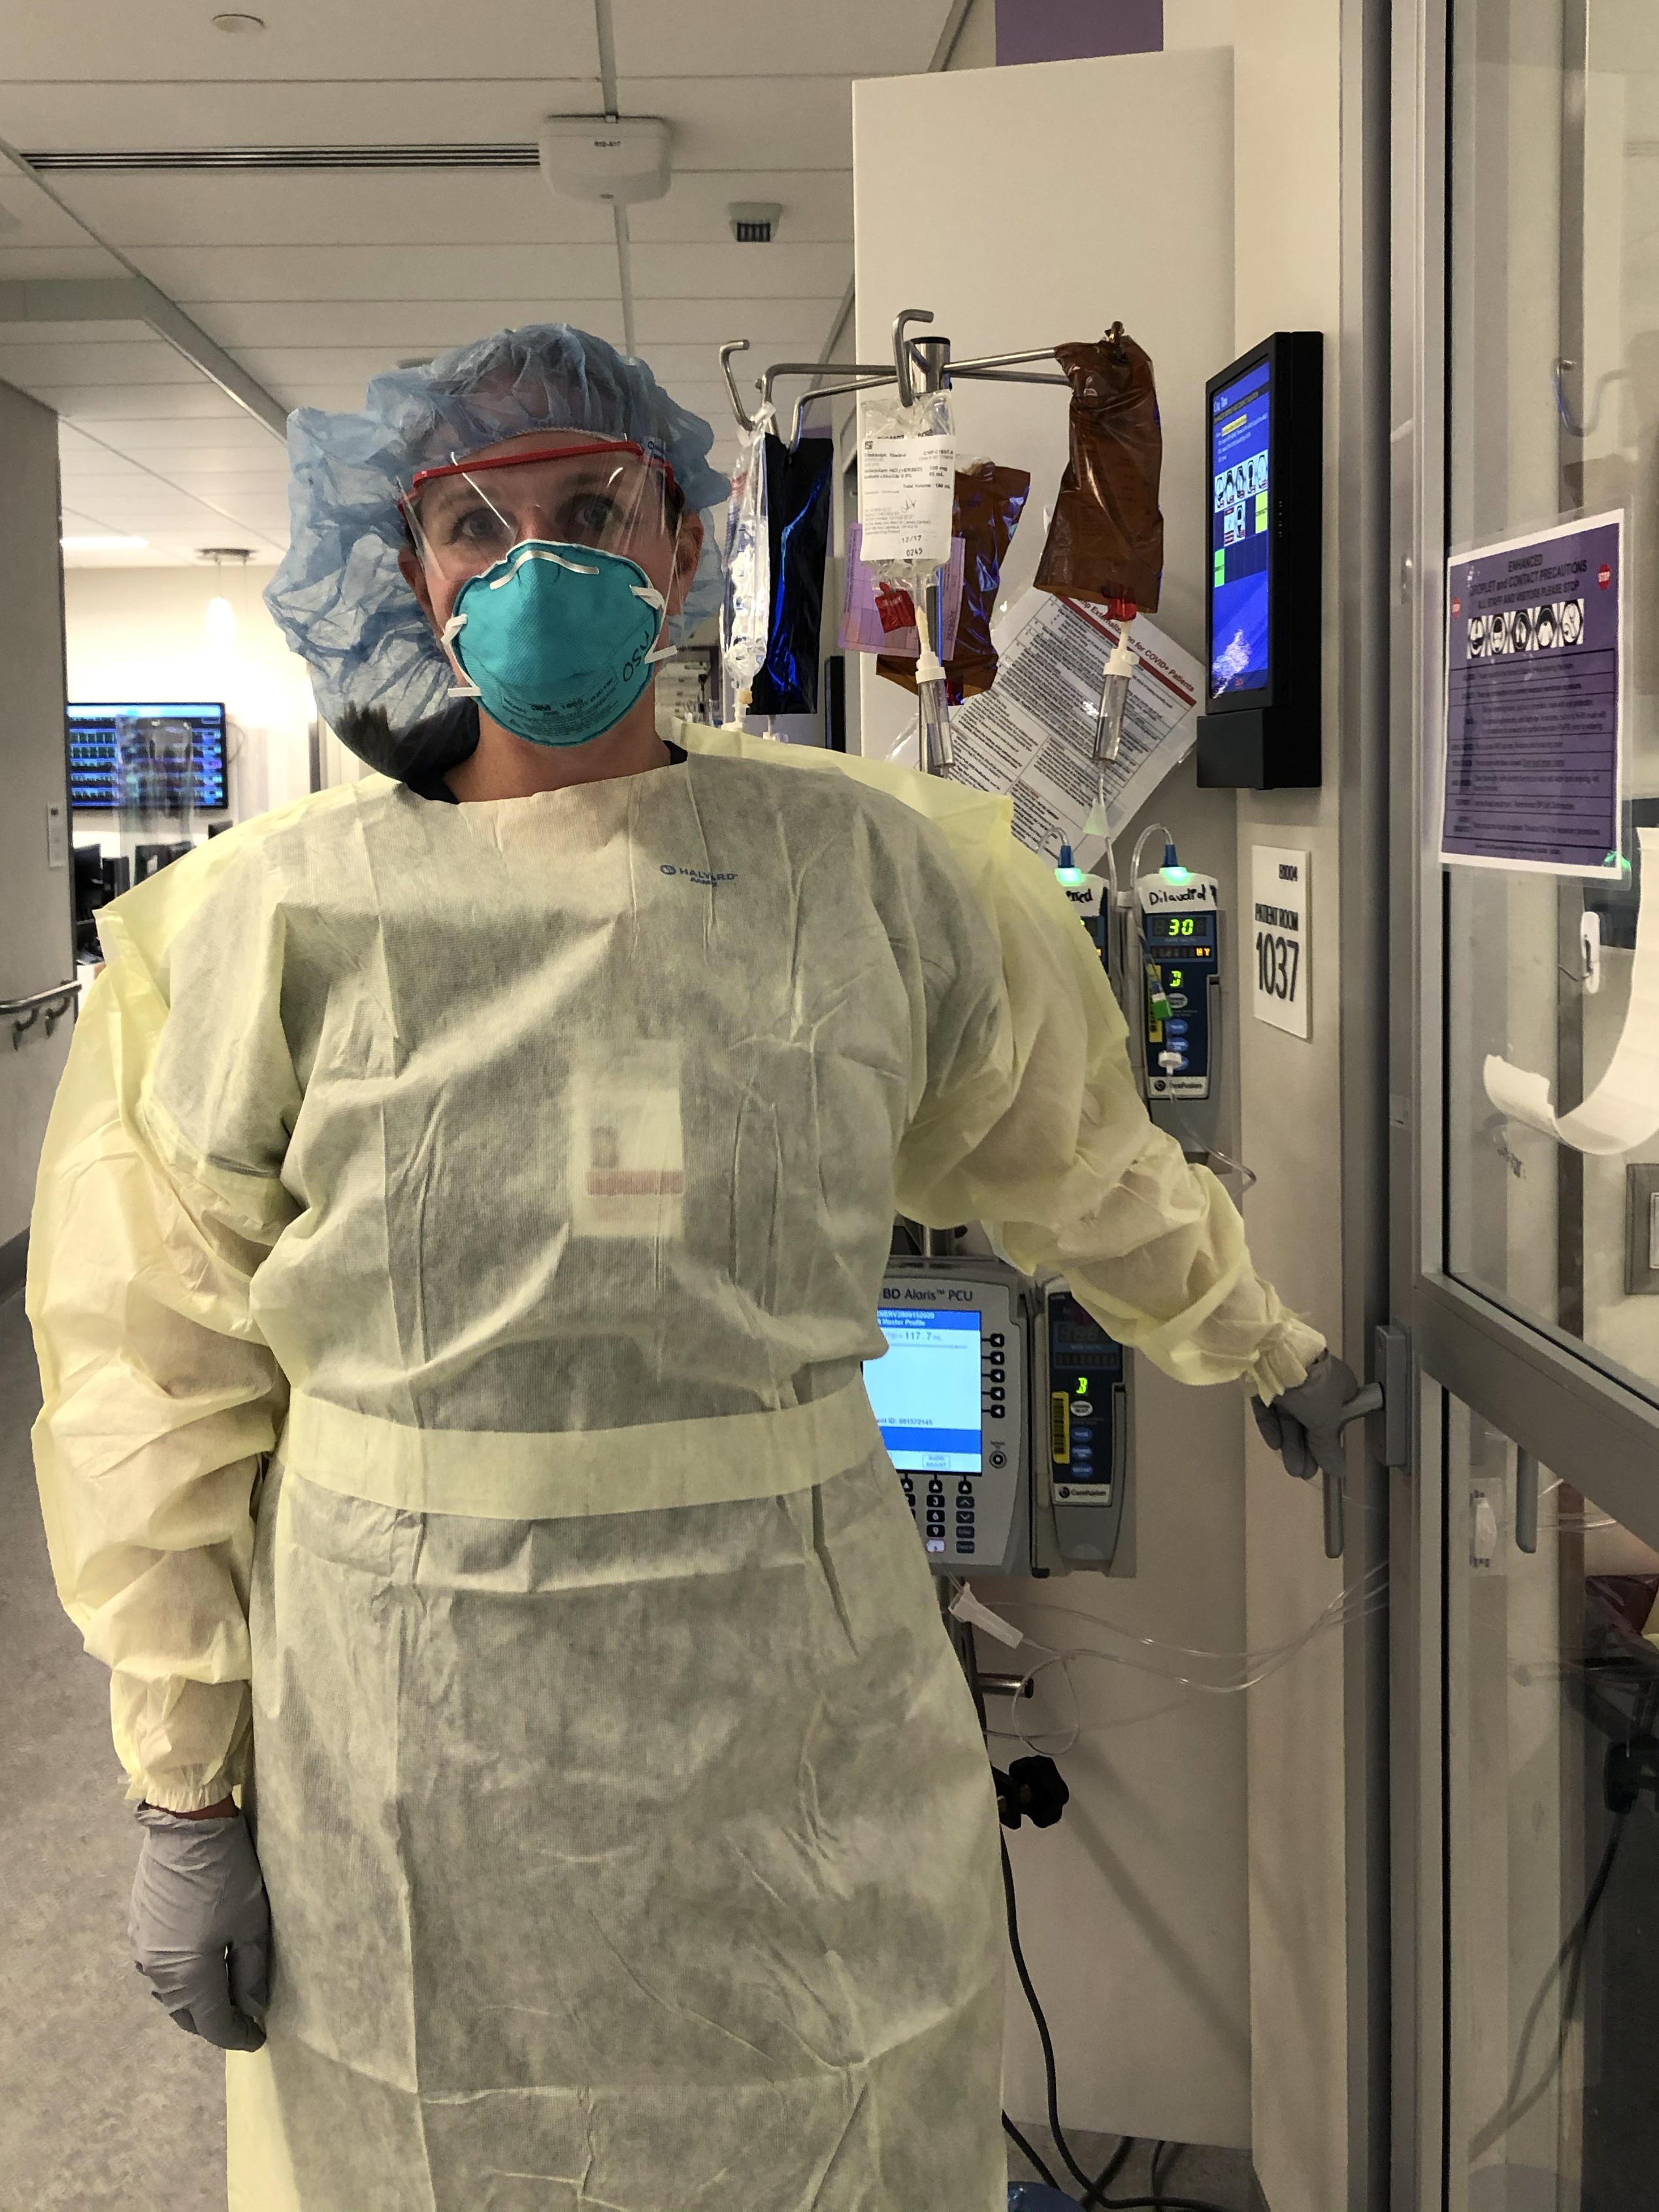 Lisa (Wahlrab) Walsh '05 in full PPE treats COVID-19 patients at The Ohio State University Wexner Medical Center ICU.